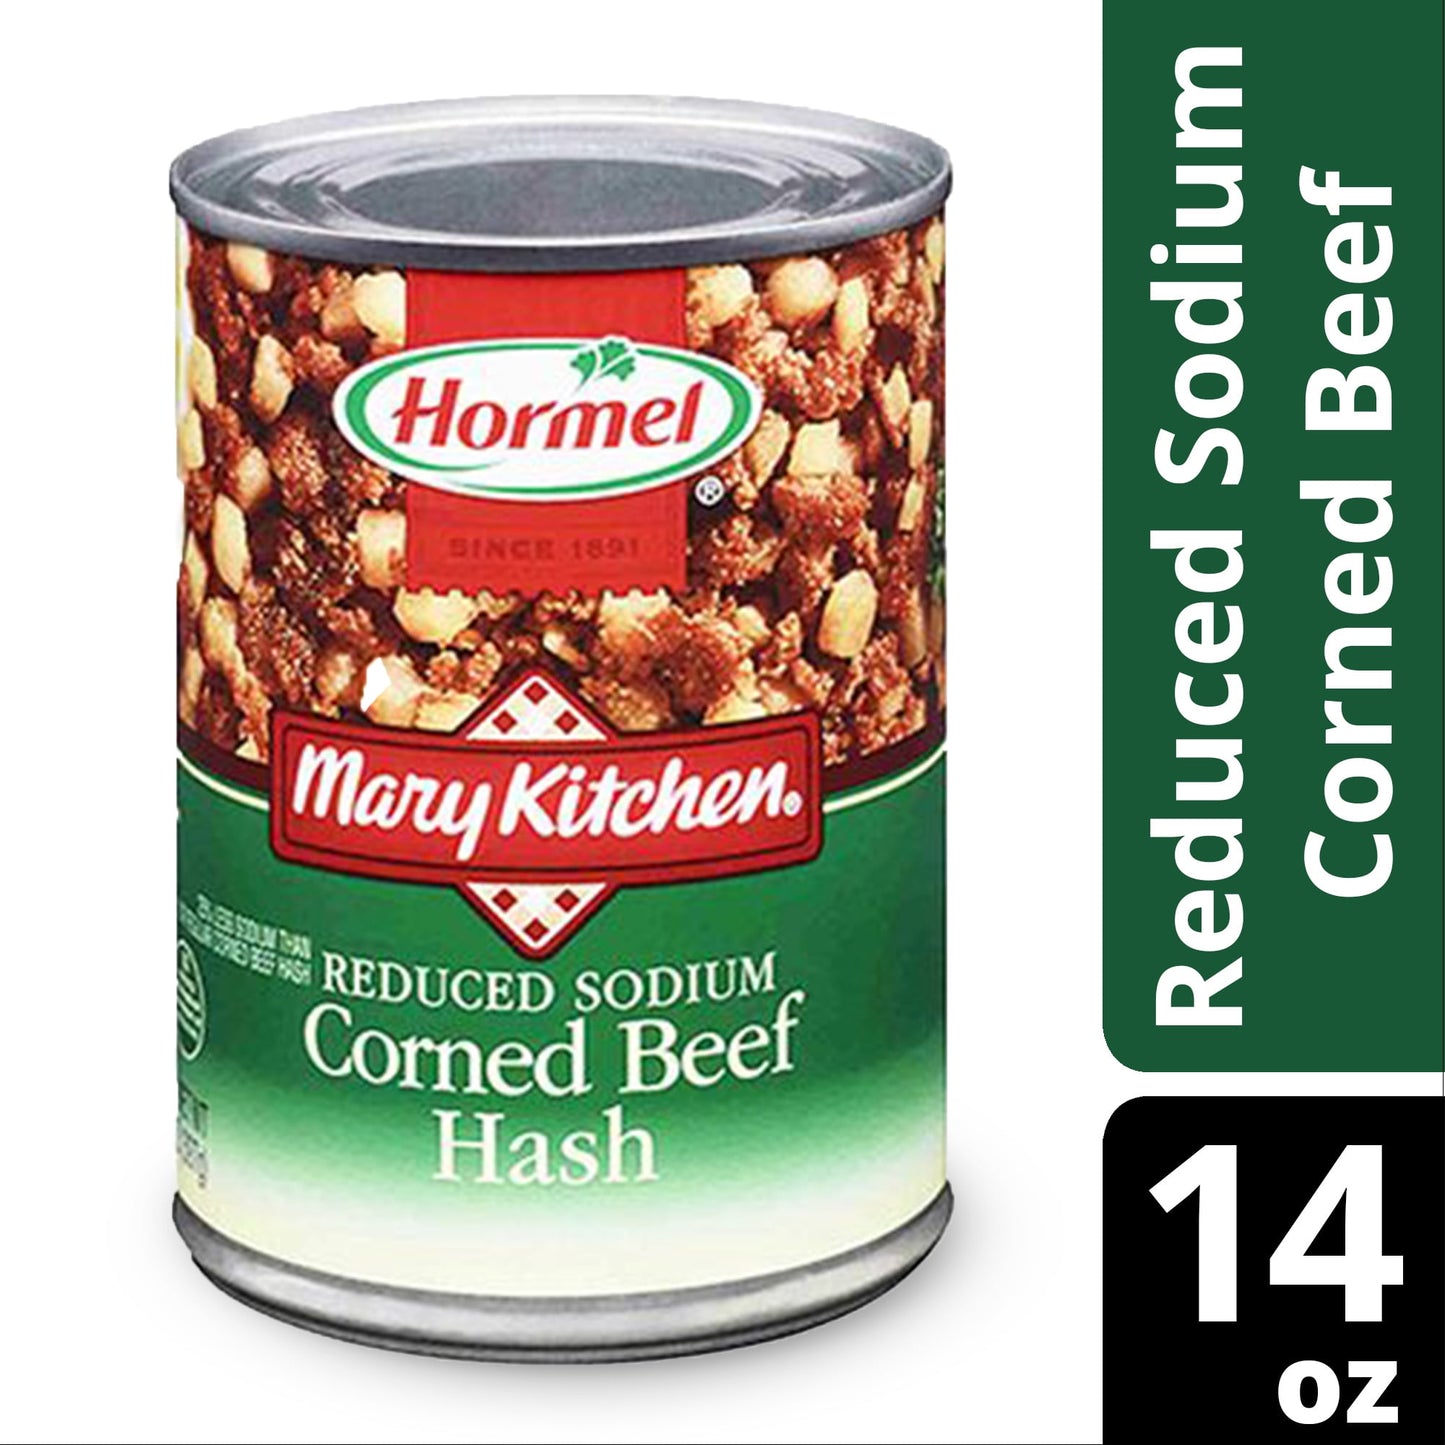 MARY KITCHEN Corned Beef Hash, Reduced Sodium, Canned Beef, 14 oz Can